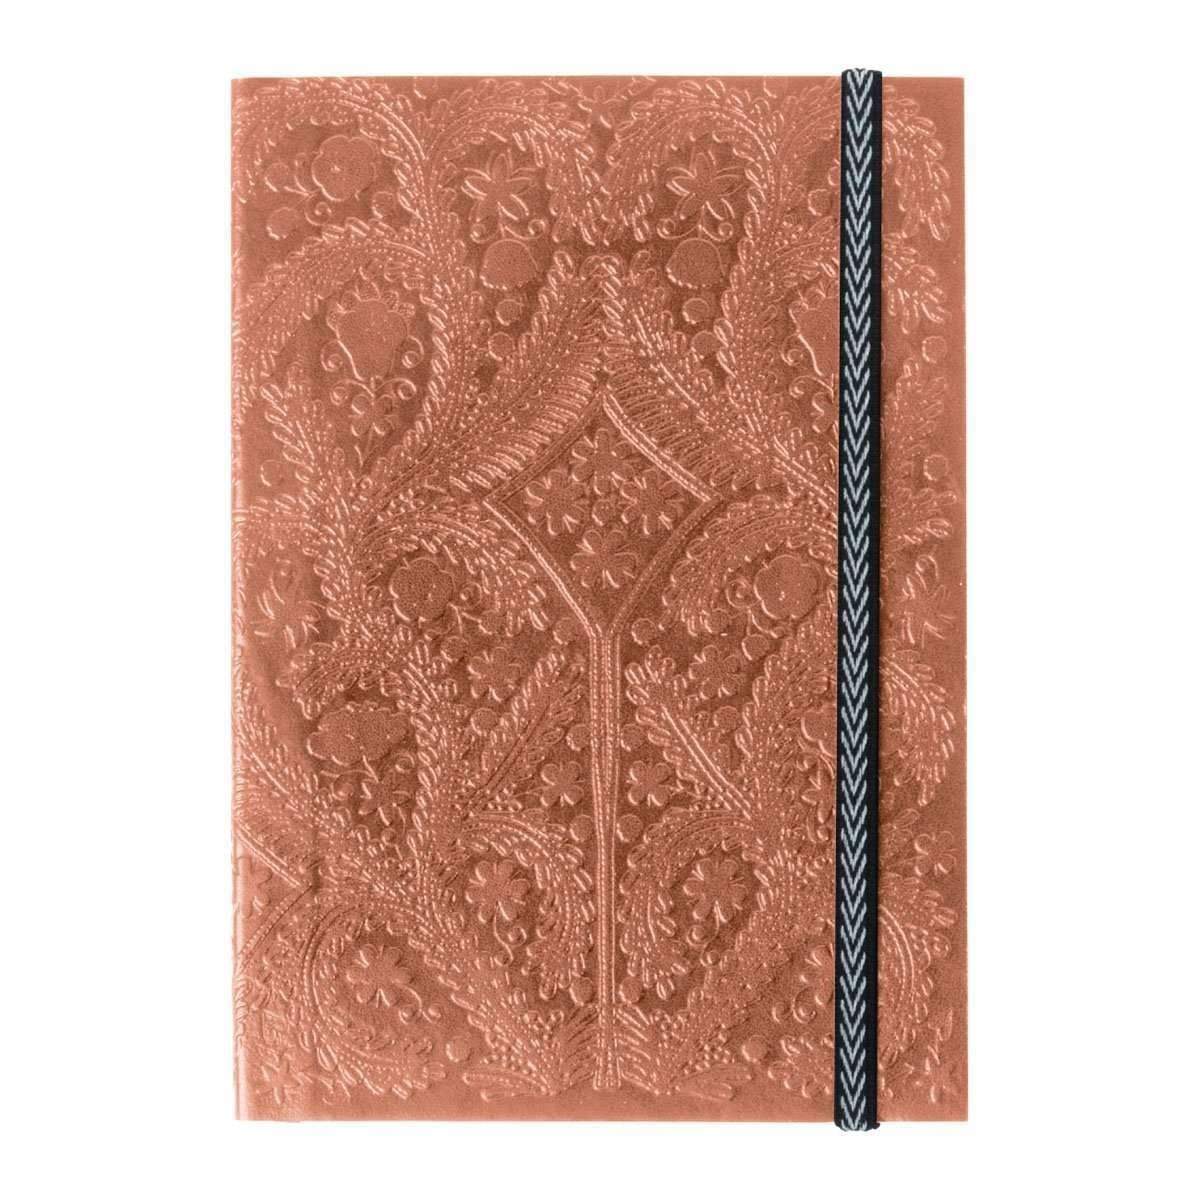 A5 Sunset Copper Embossed Notebook By Christian Lacroix